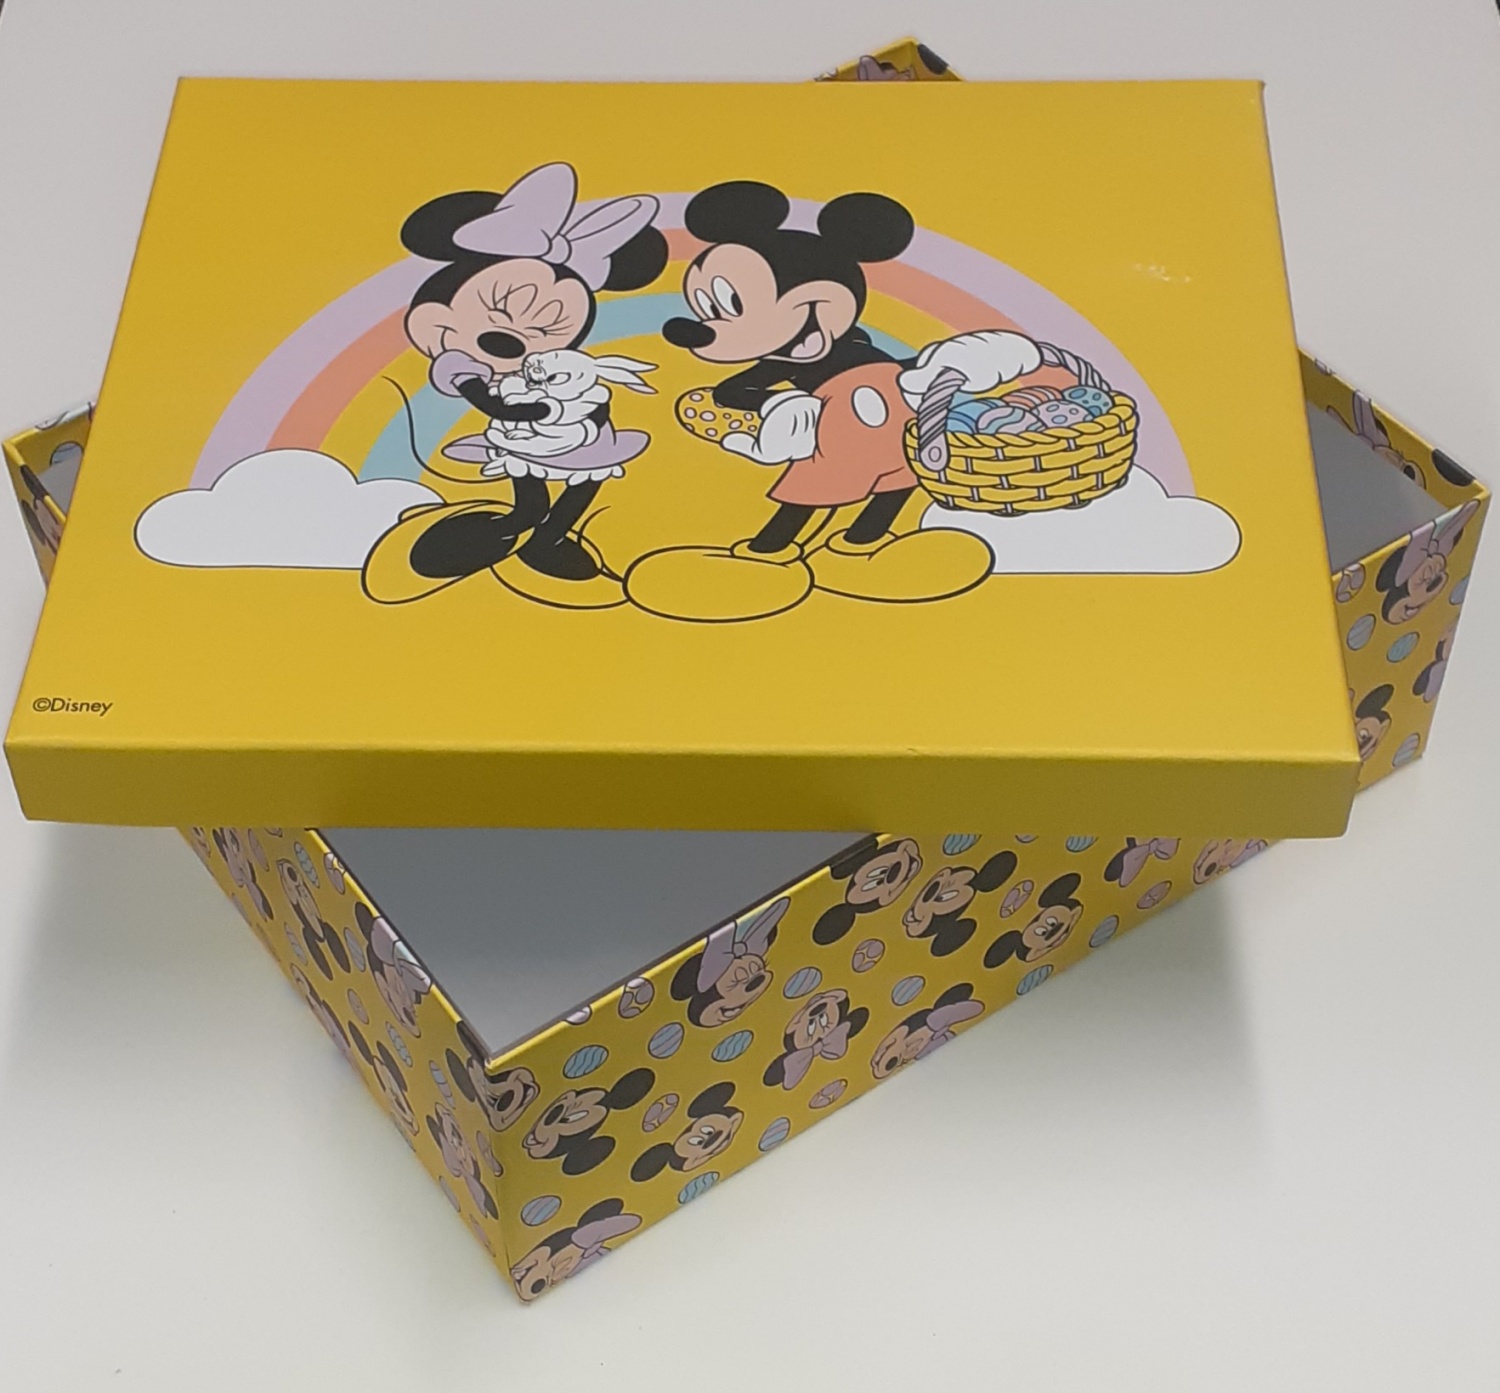 George Disney Mickey & Minnie Mouse Large Gift Box RRP 2.99 CLEARANCE XL 1.99